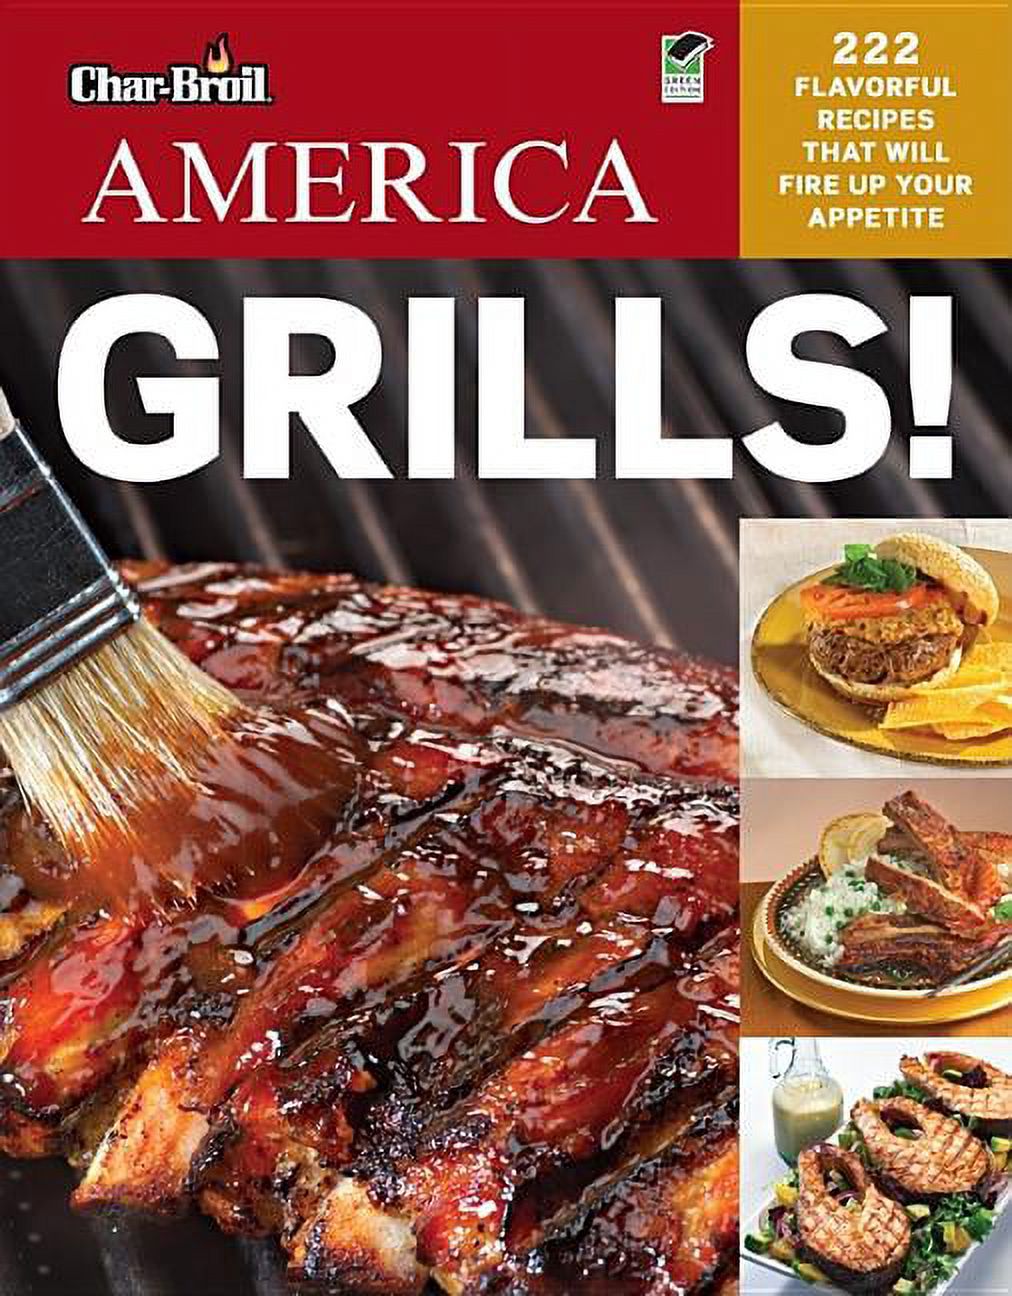 Char-Broil's America Grills! : 222 Flavorful Recipes That Will Fire Up Your Appetite - image 1 of 2